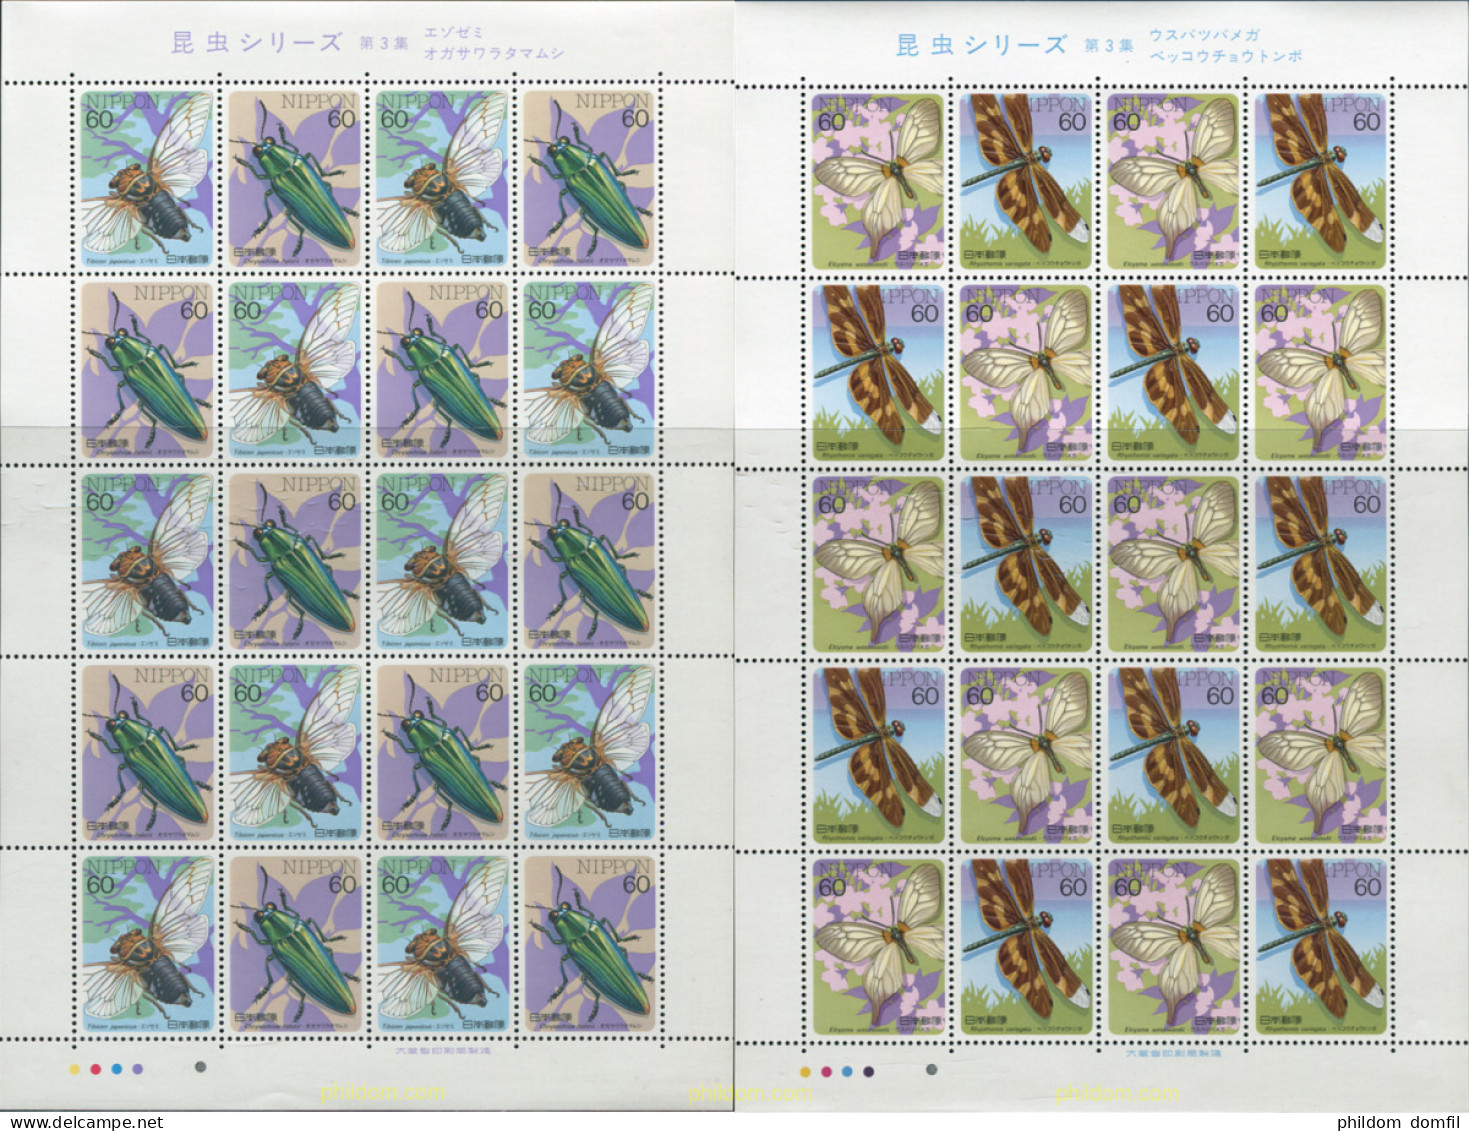 337331 MNH JAPON 1986 INSECTOS - Unused Stamps